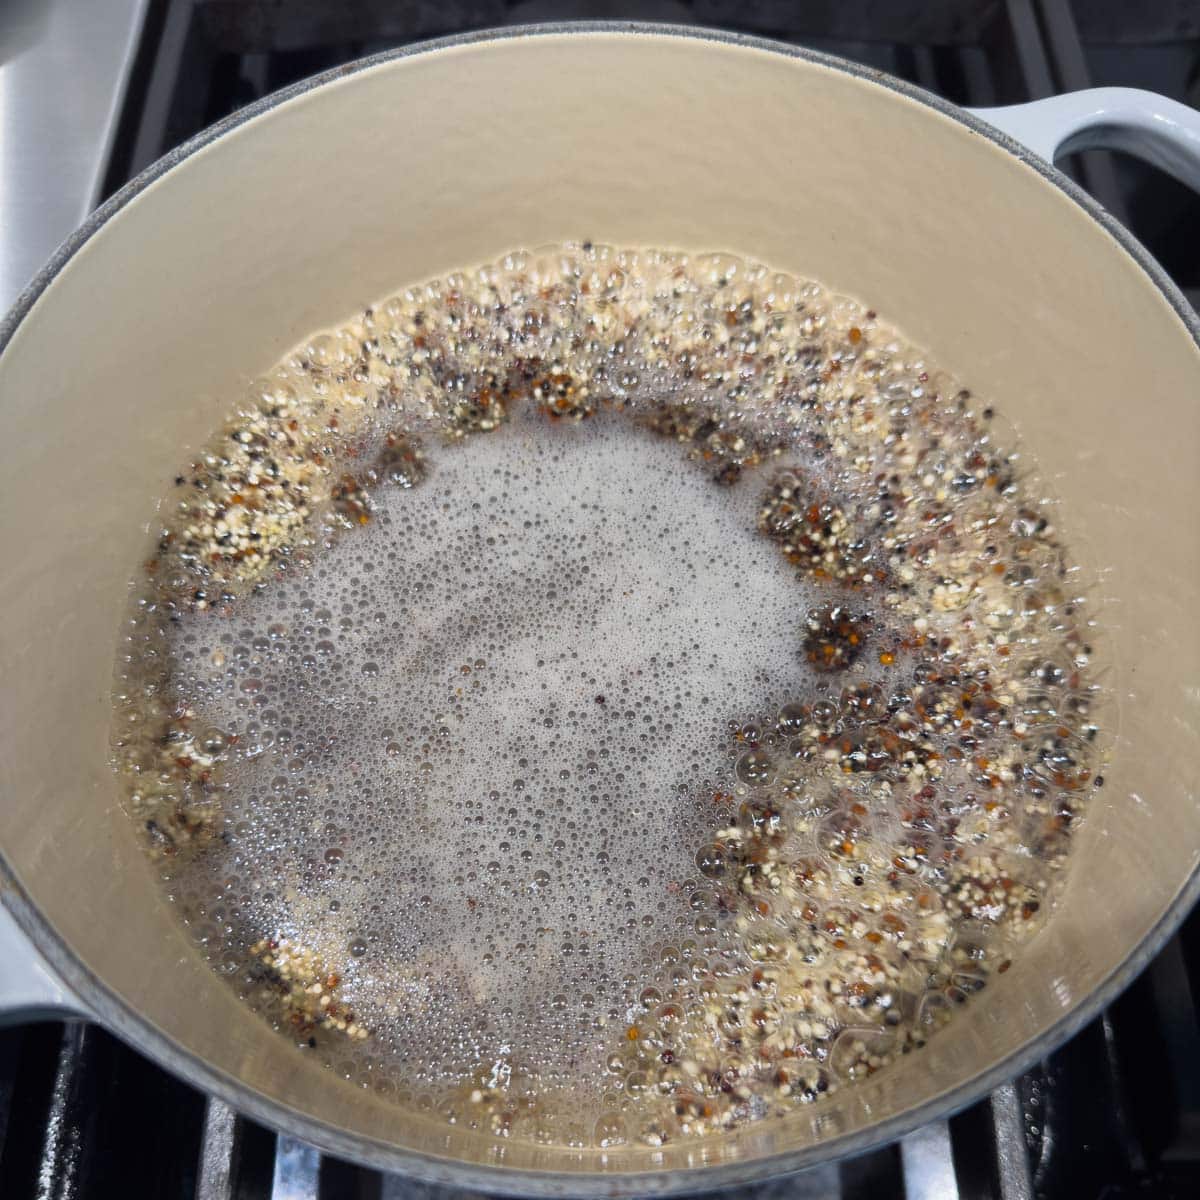 Cooking quinoa in a pot on the stovetop.